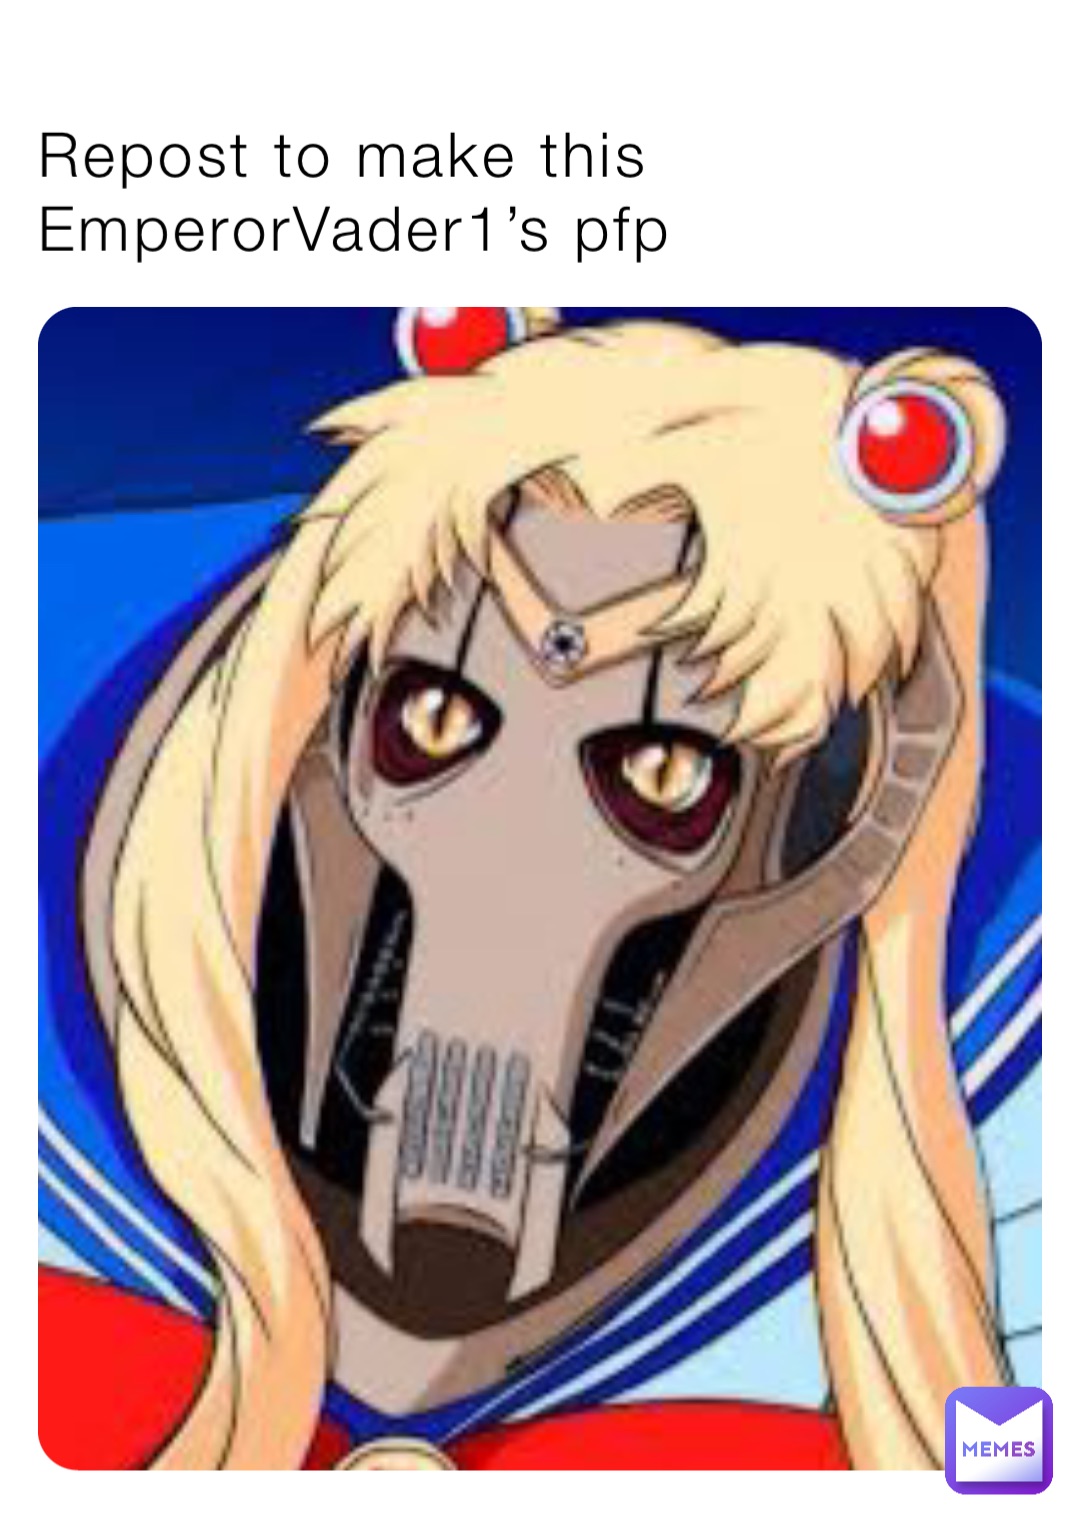 Repost to make this EmperorVader1’s pfp